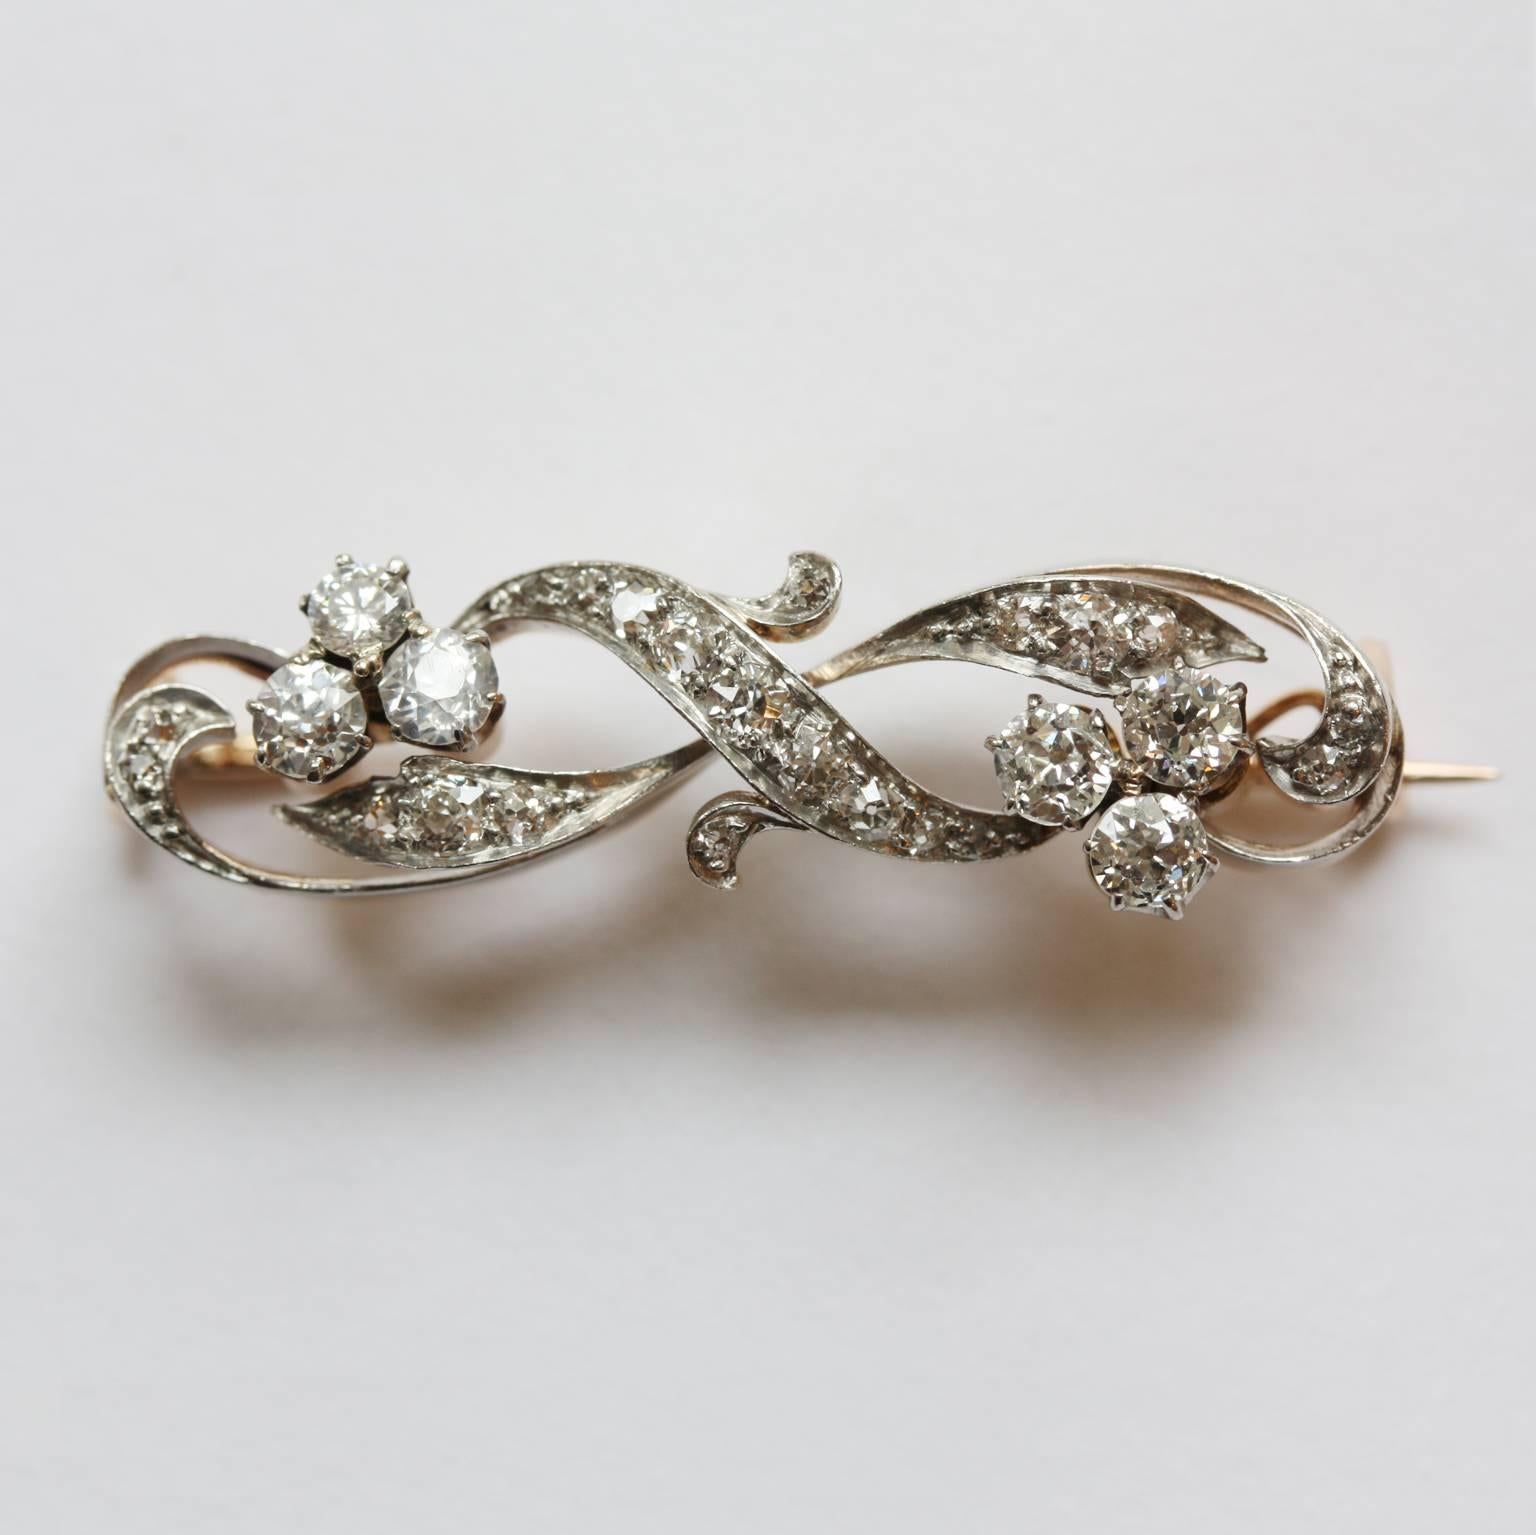 A 14 carat rosé and white gold brooch set with old cut diamonds in the shape of berries and leaves (app. 1.16 carats), circa 1910, Dutch.

weight: 6.6 grams
dimensions: 3.5 x 1 cm.